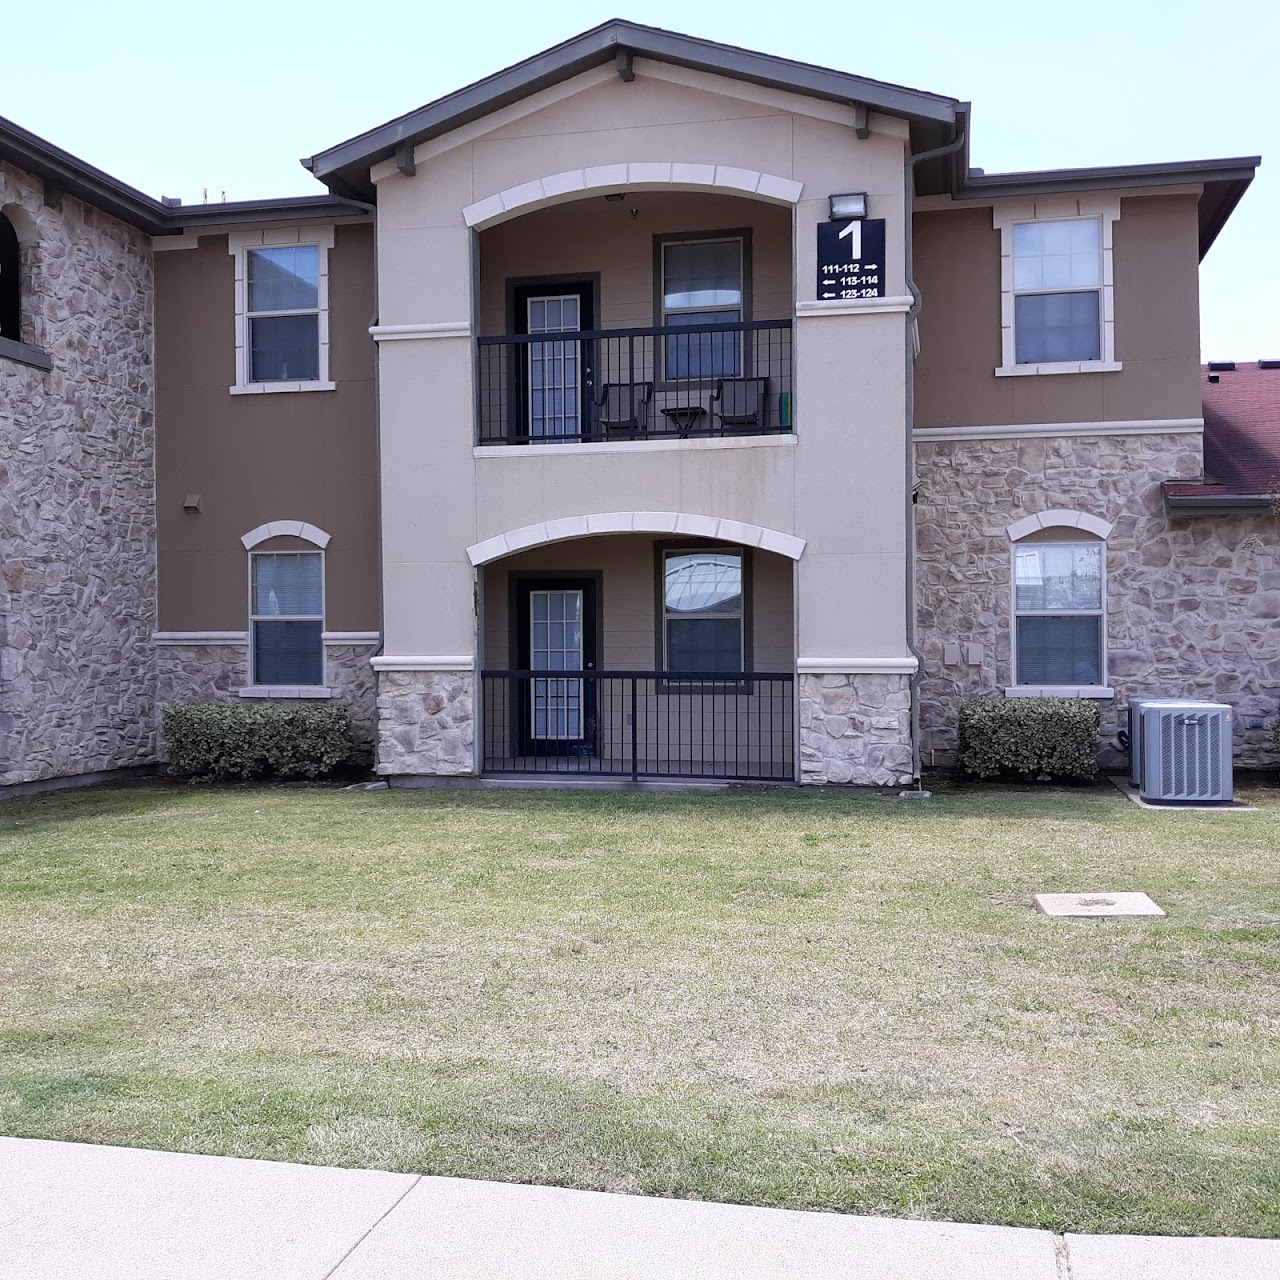 Photo of CIMARRON SPRINGS APTS. Affordable housing located at 1302 E KILPATRICK ST CLEBURNE, TX 76031